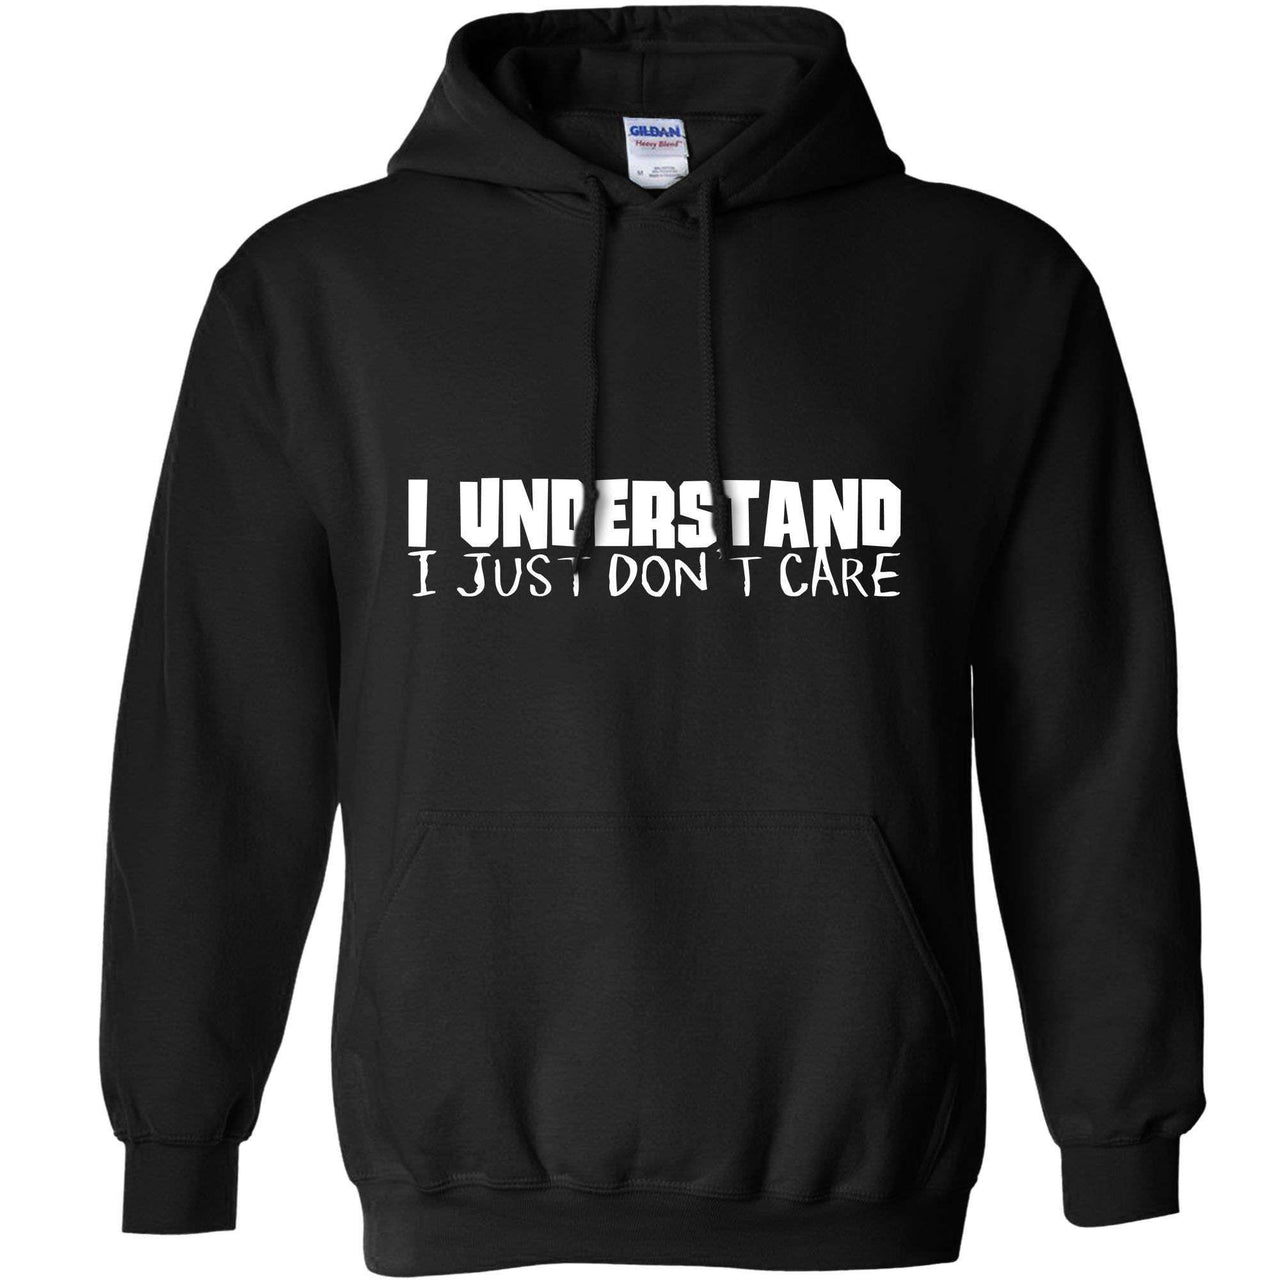 I Understand I Just Dont Care Hoodie For Men and Women 8Ball